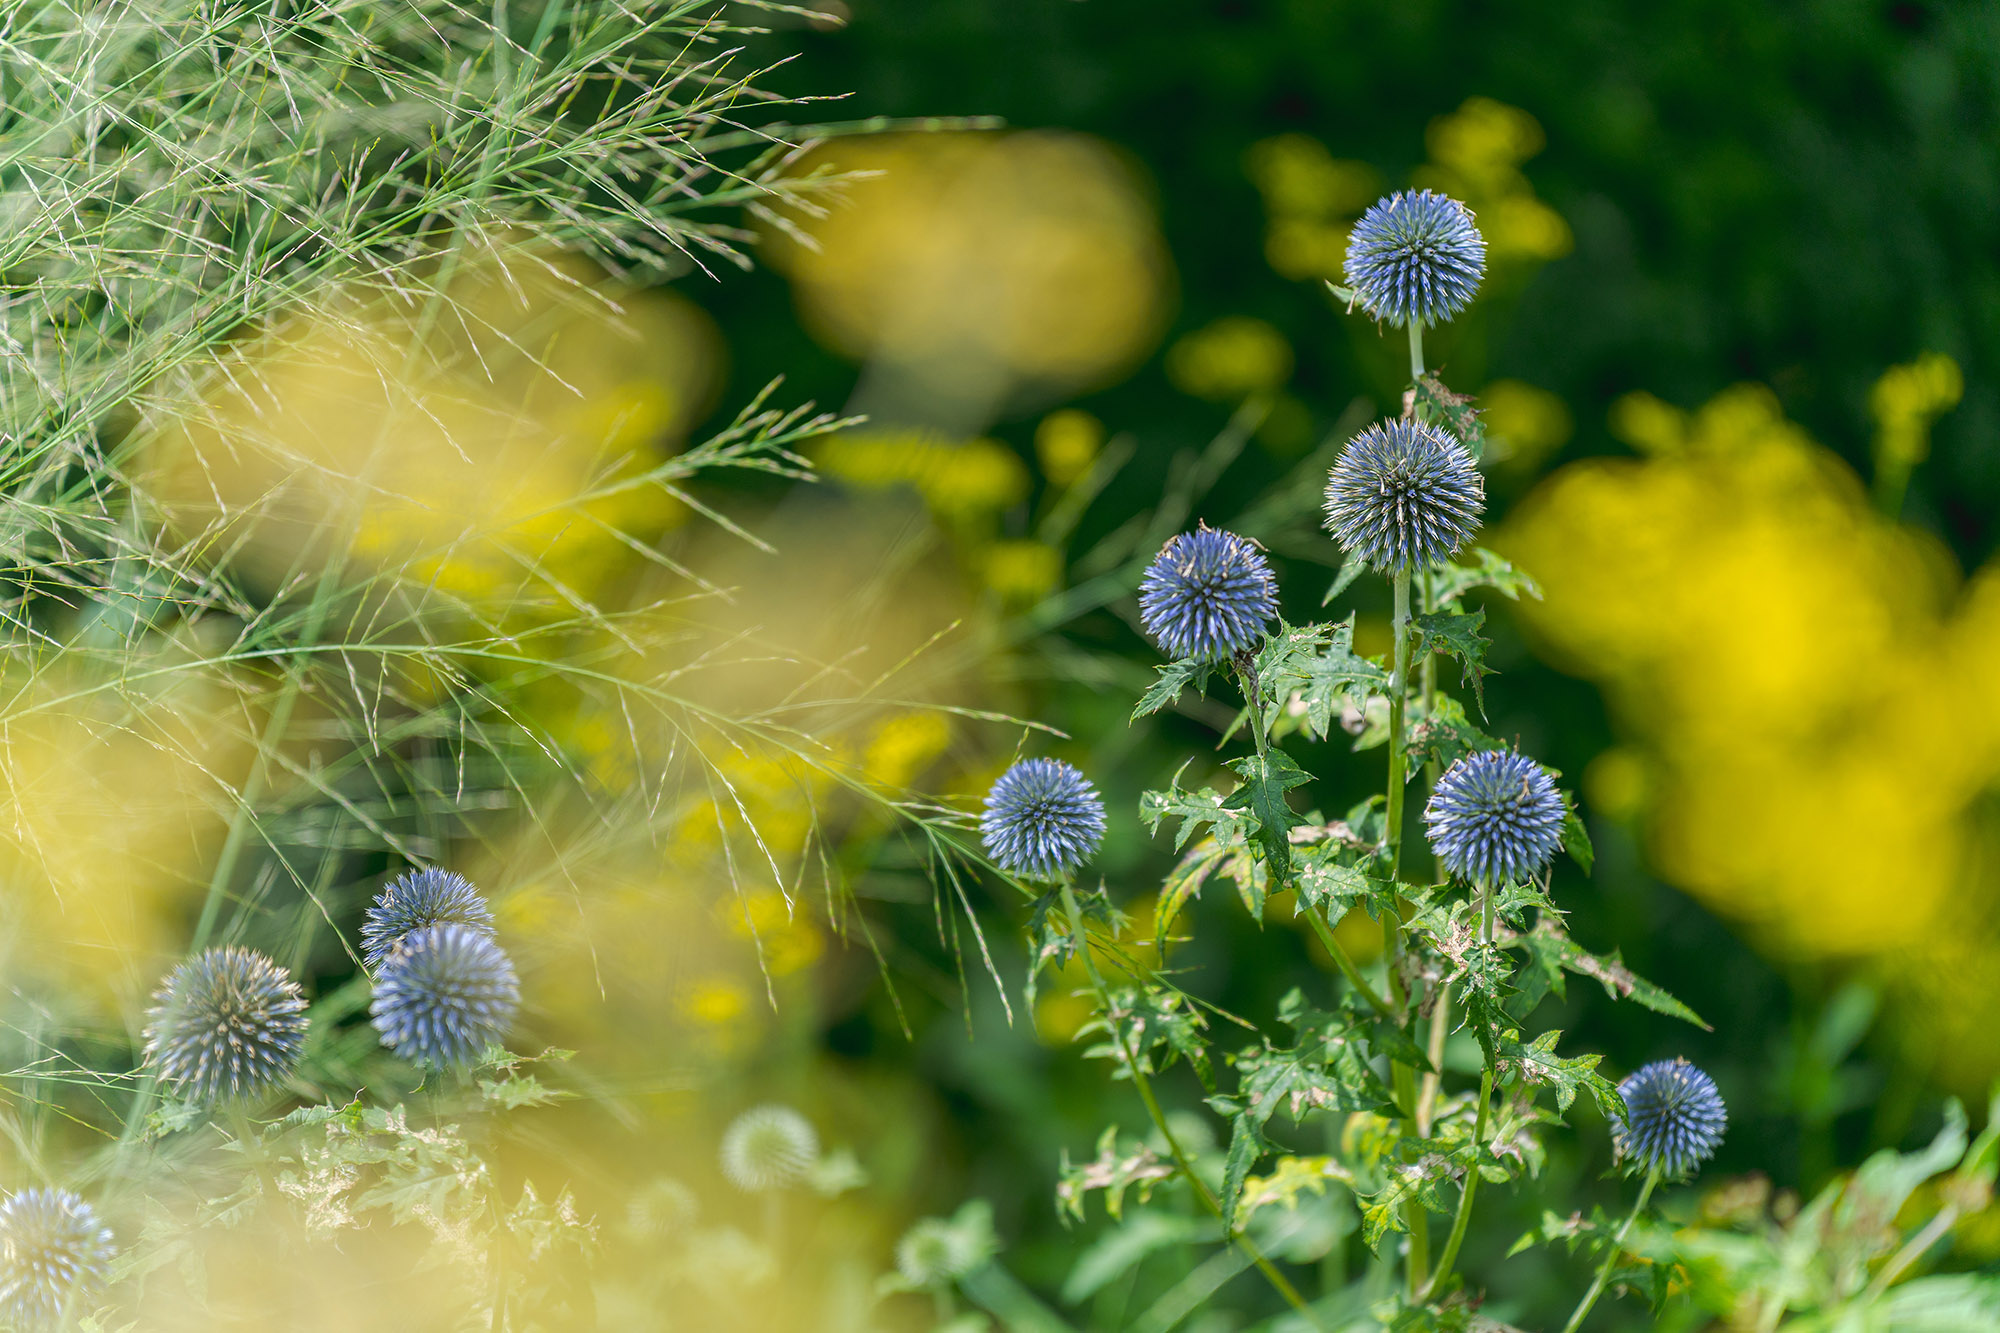 Blue flowers in spherical shapes bloom in the summer greenery